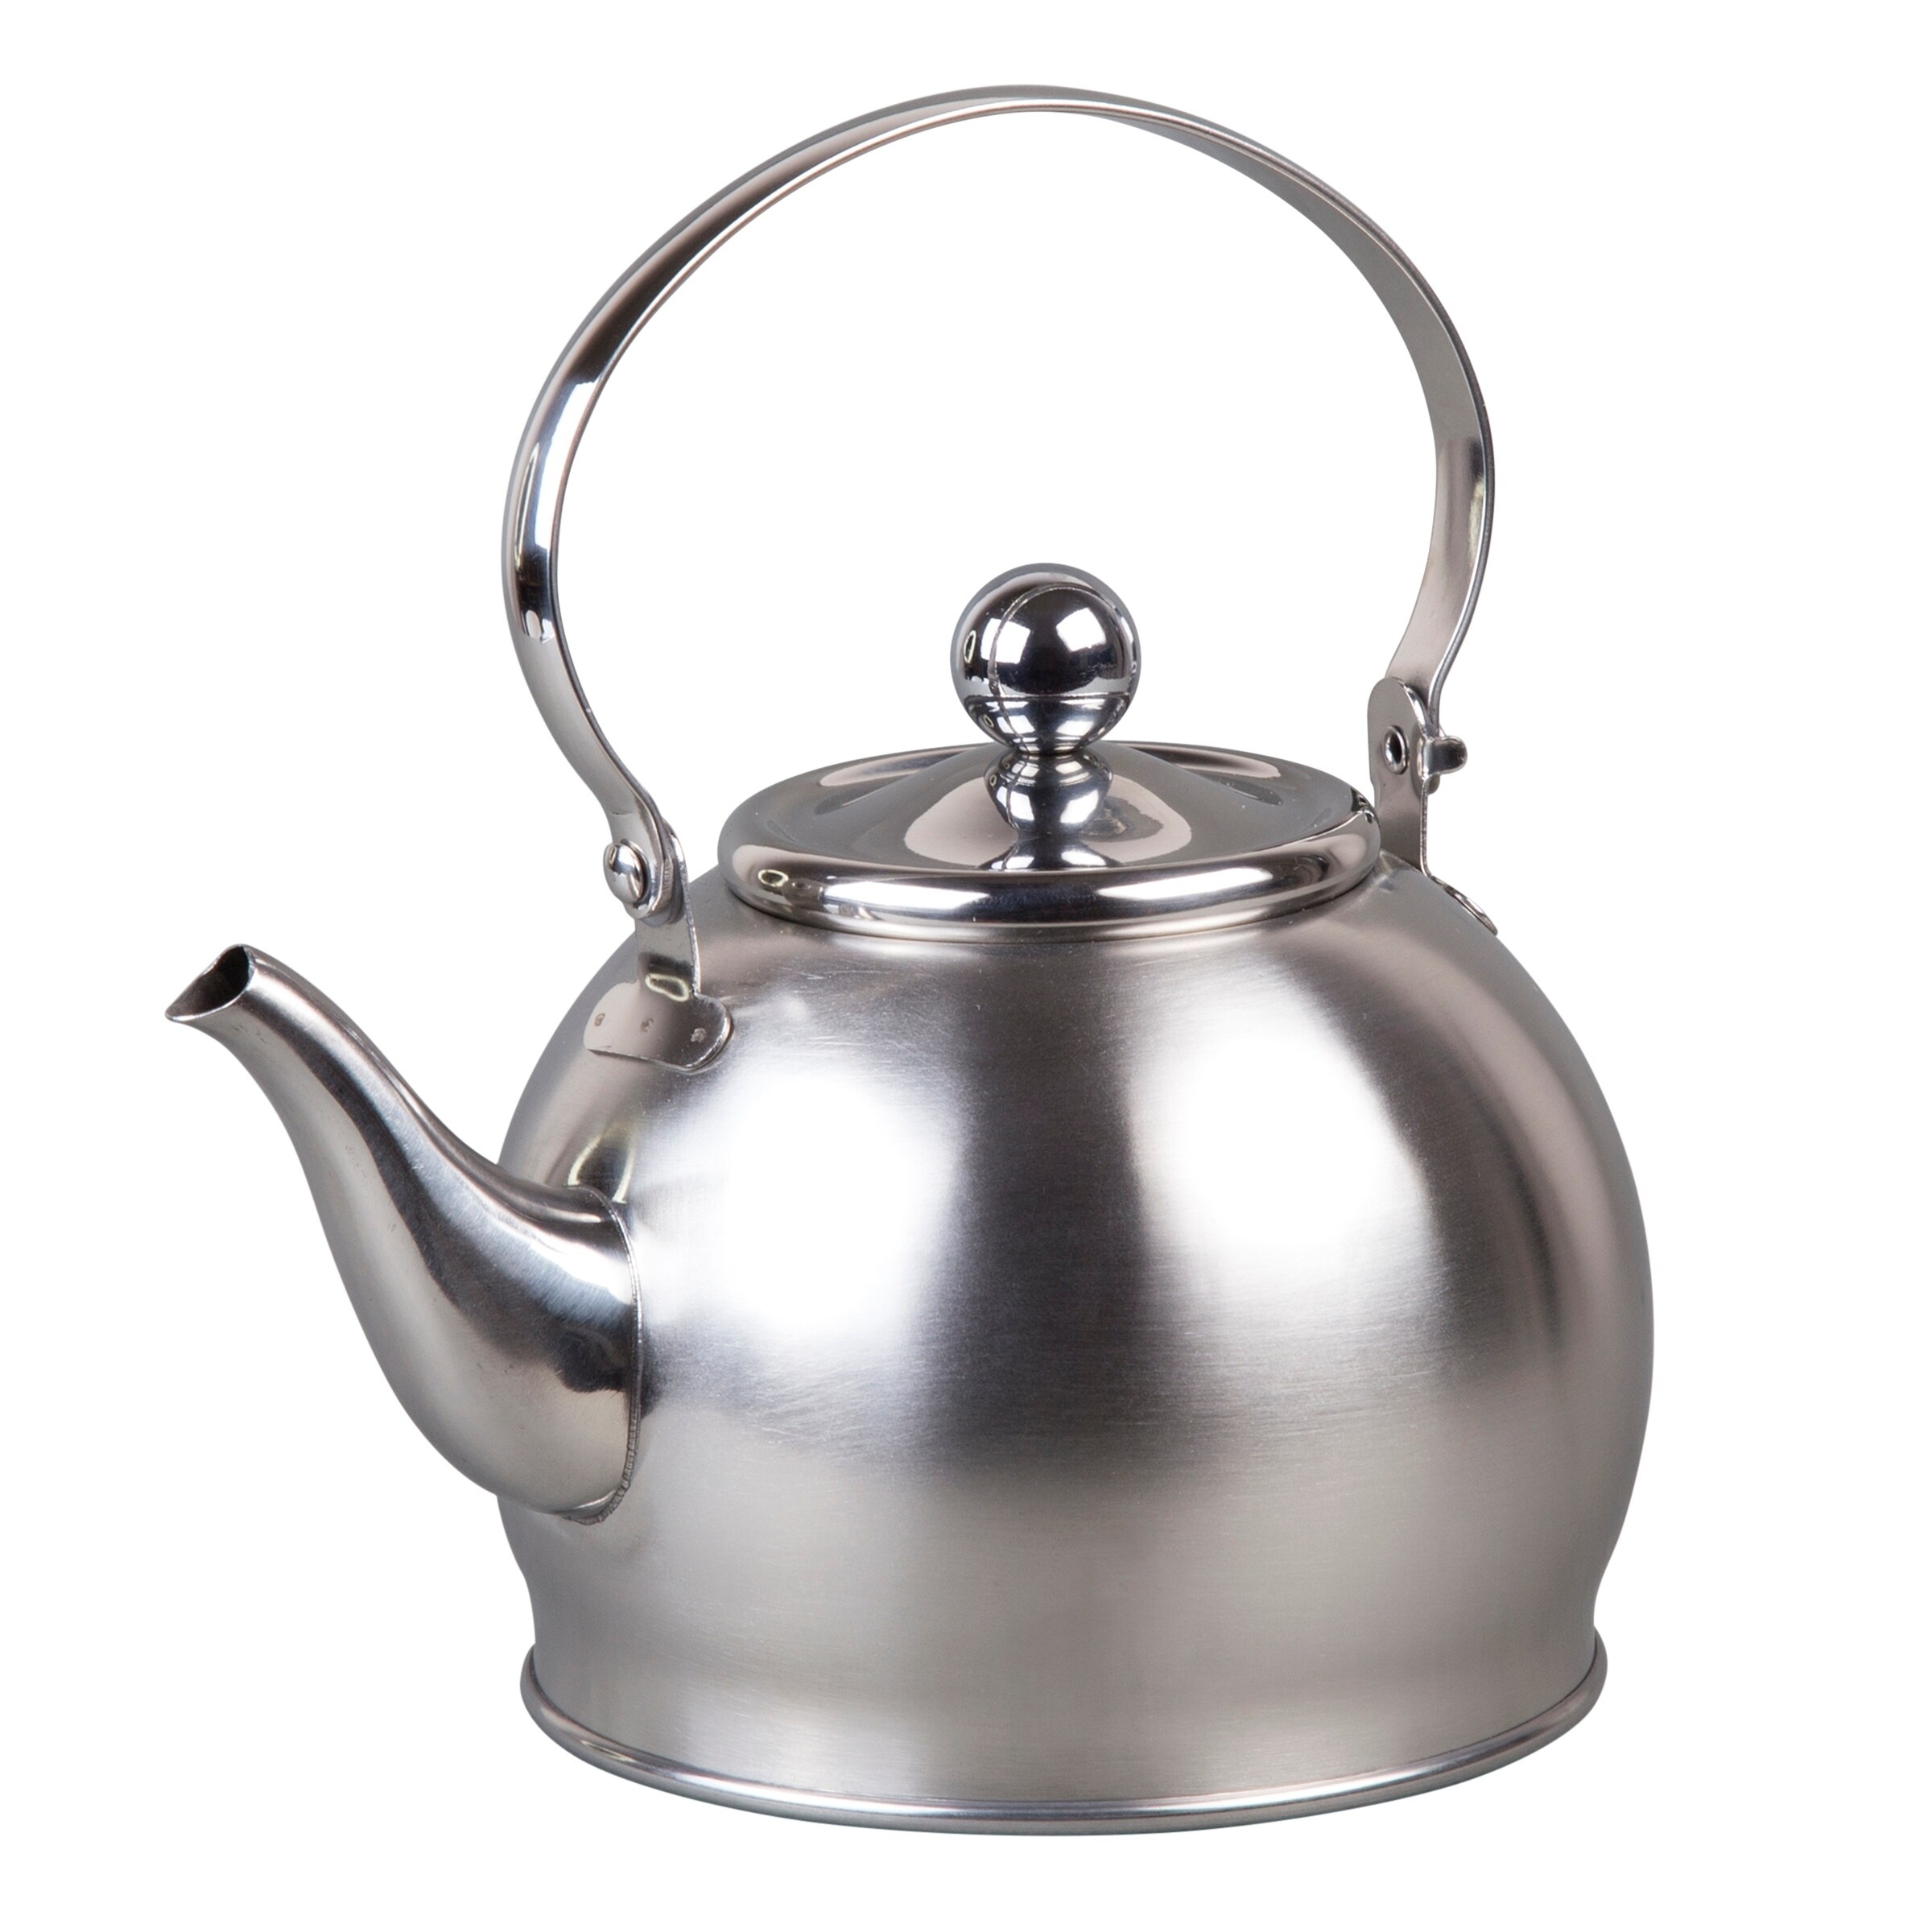 Nobili-Tea 1 Qt Stainless Tea Kettle w/Infuser Basket(for all cooktops-ship  free